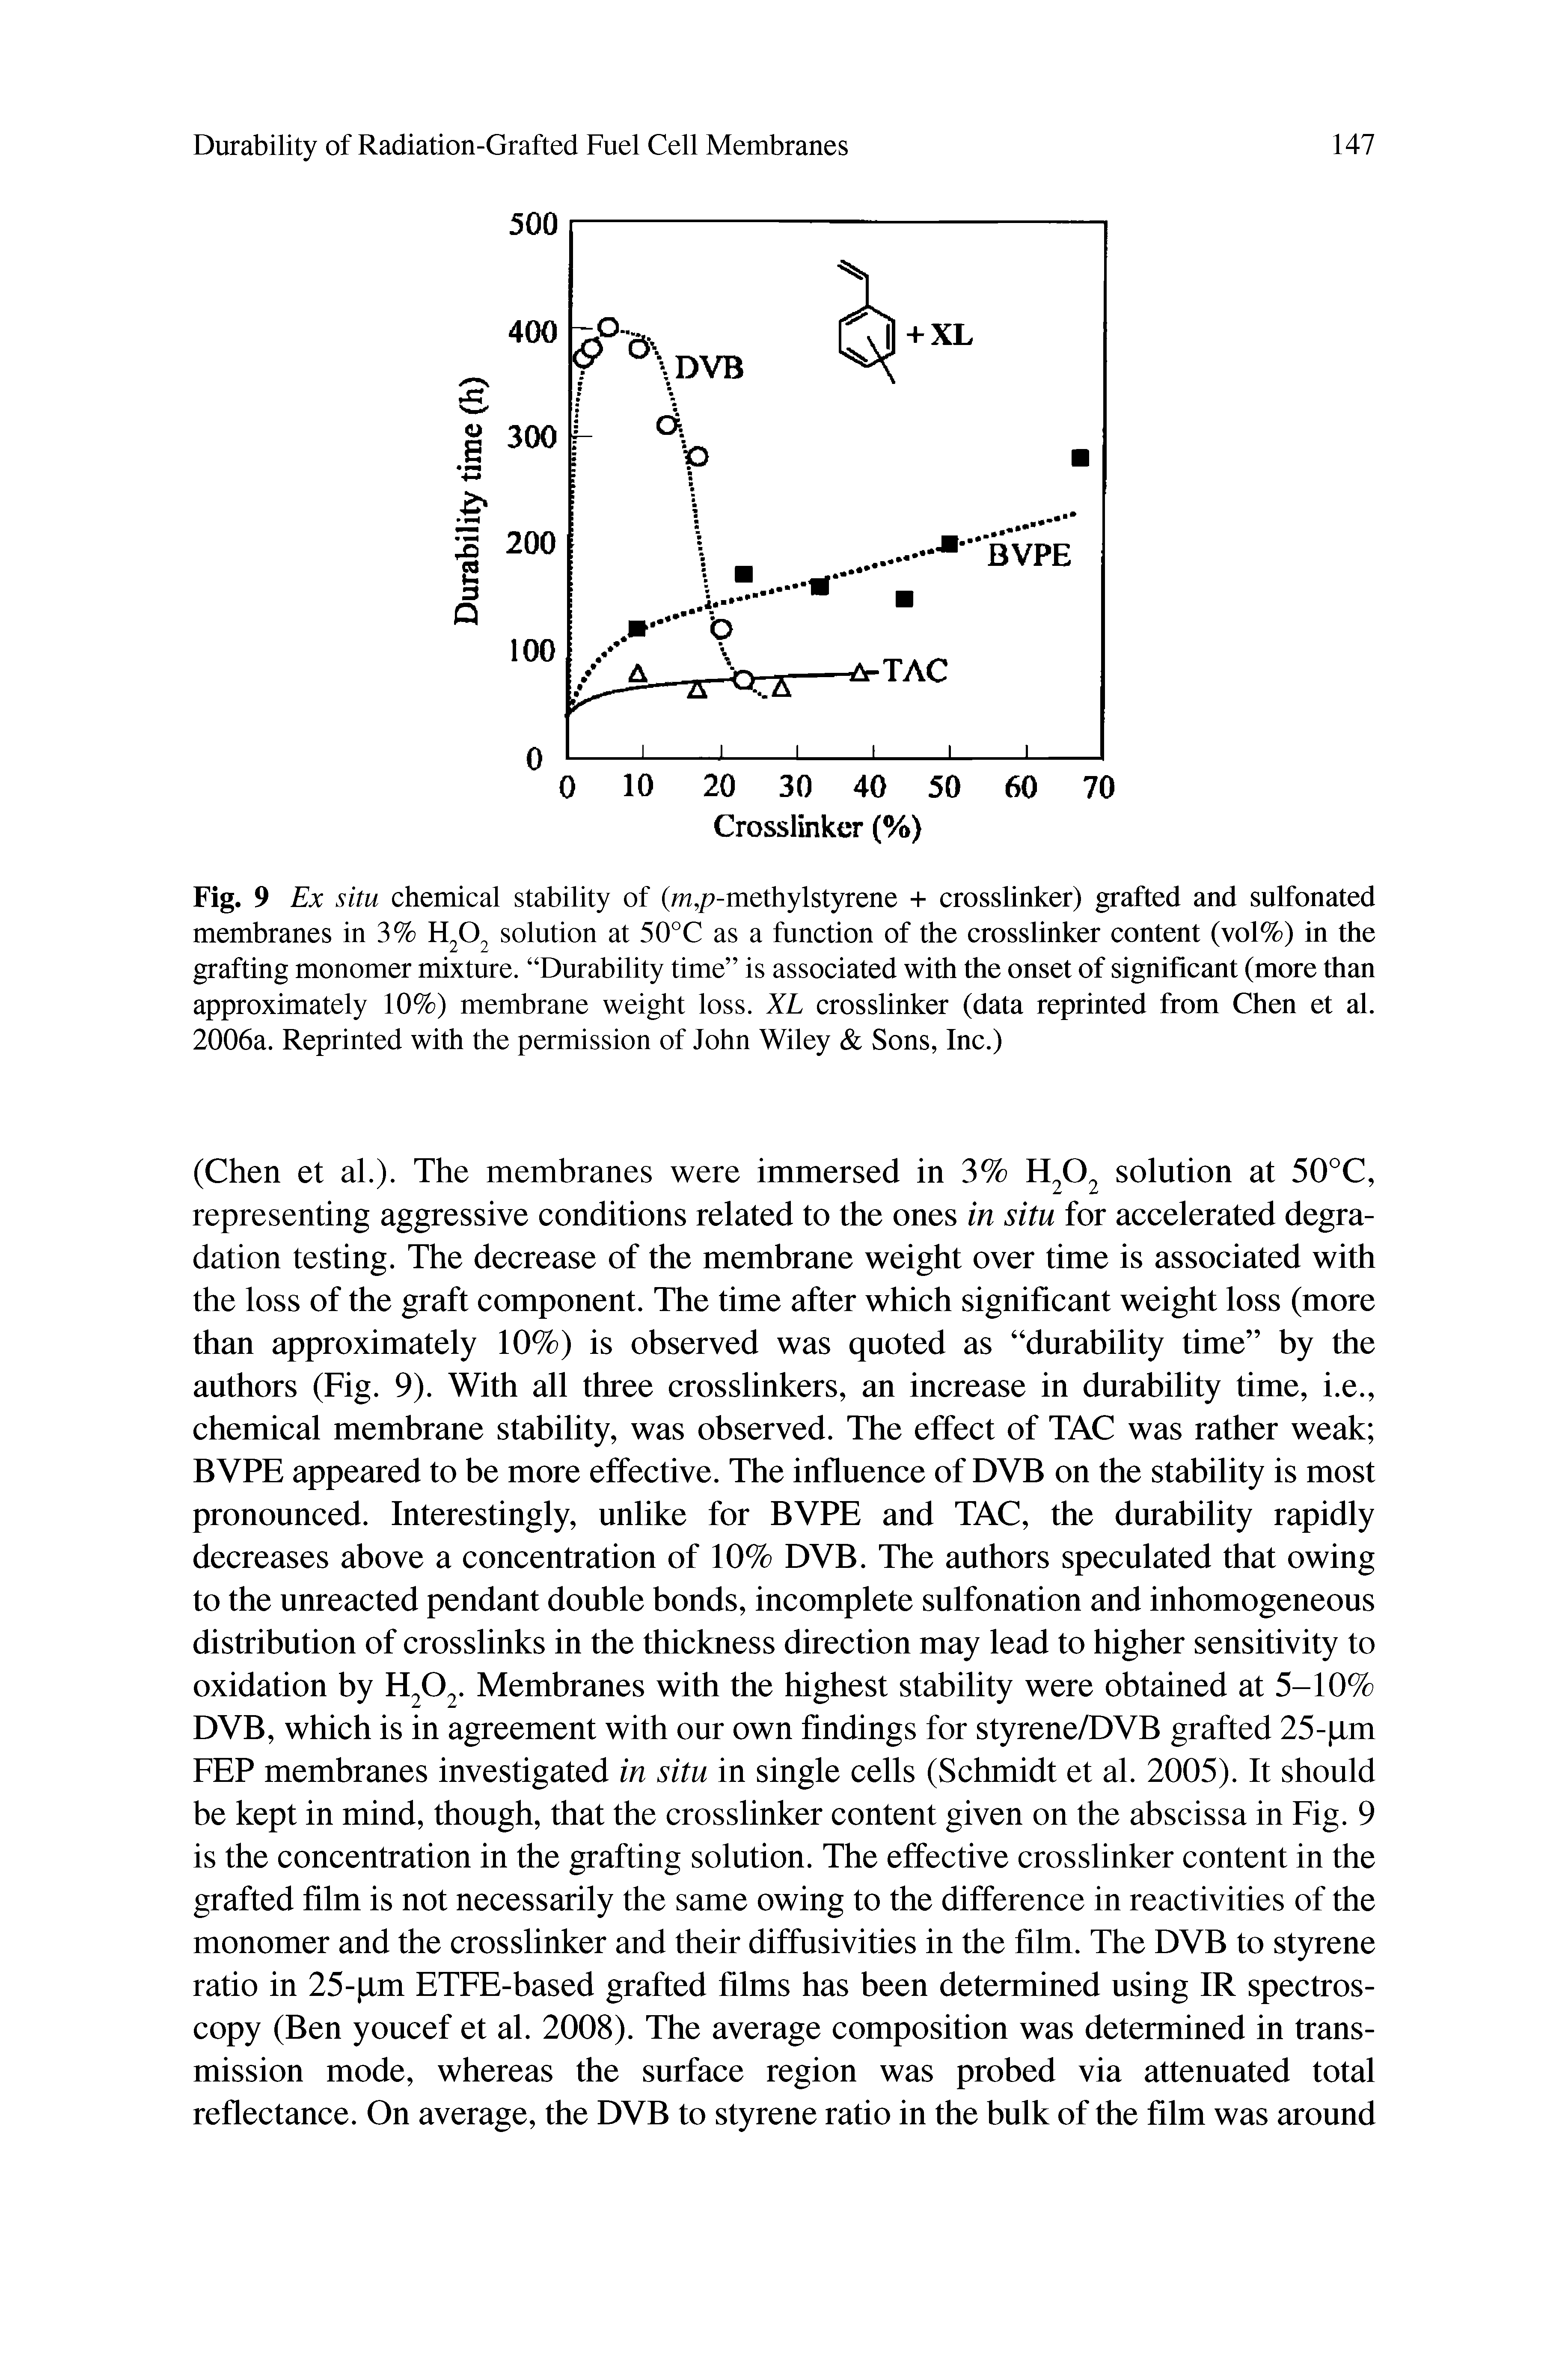 Fig. 9 Ex situ chemical stability of (m,/7-methylstyrene + crosslinker) grafted and sulfonated membranes in 3% solution at 50°C as a function of the crosslinker content (vol%) in the grafting monomer mixture. Durability time is associated with the onset of significant (more than approximately 10%) membrane weight loss. XL crosslinker (data reprinted from Chen et al. 2006a. Reprinted with the permission of John Wiley Sons, Inc.)...